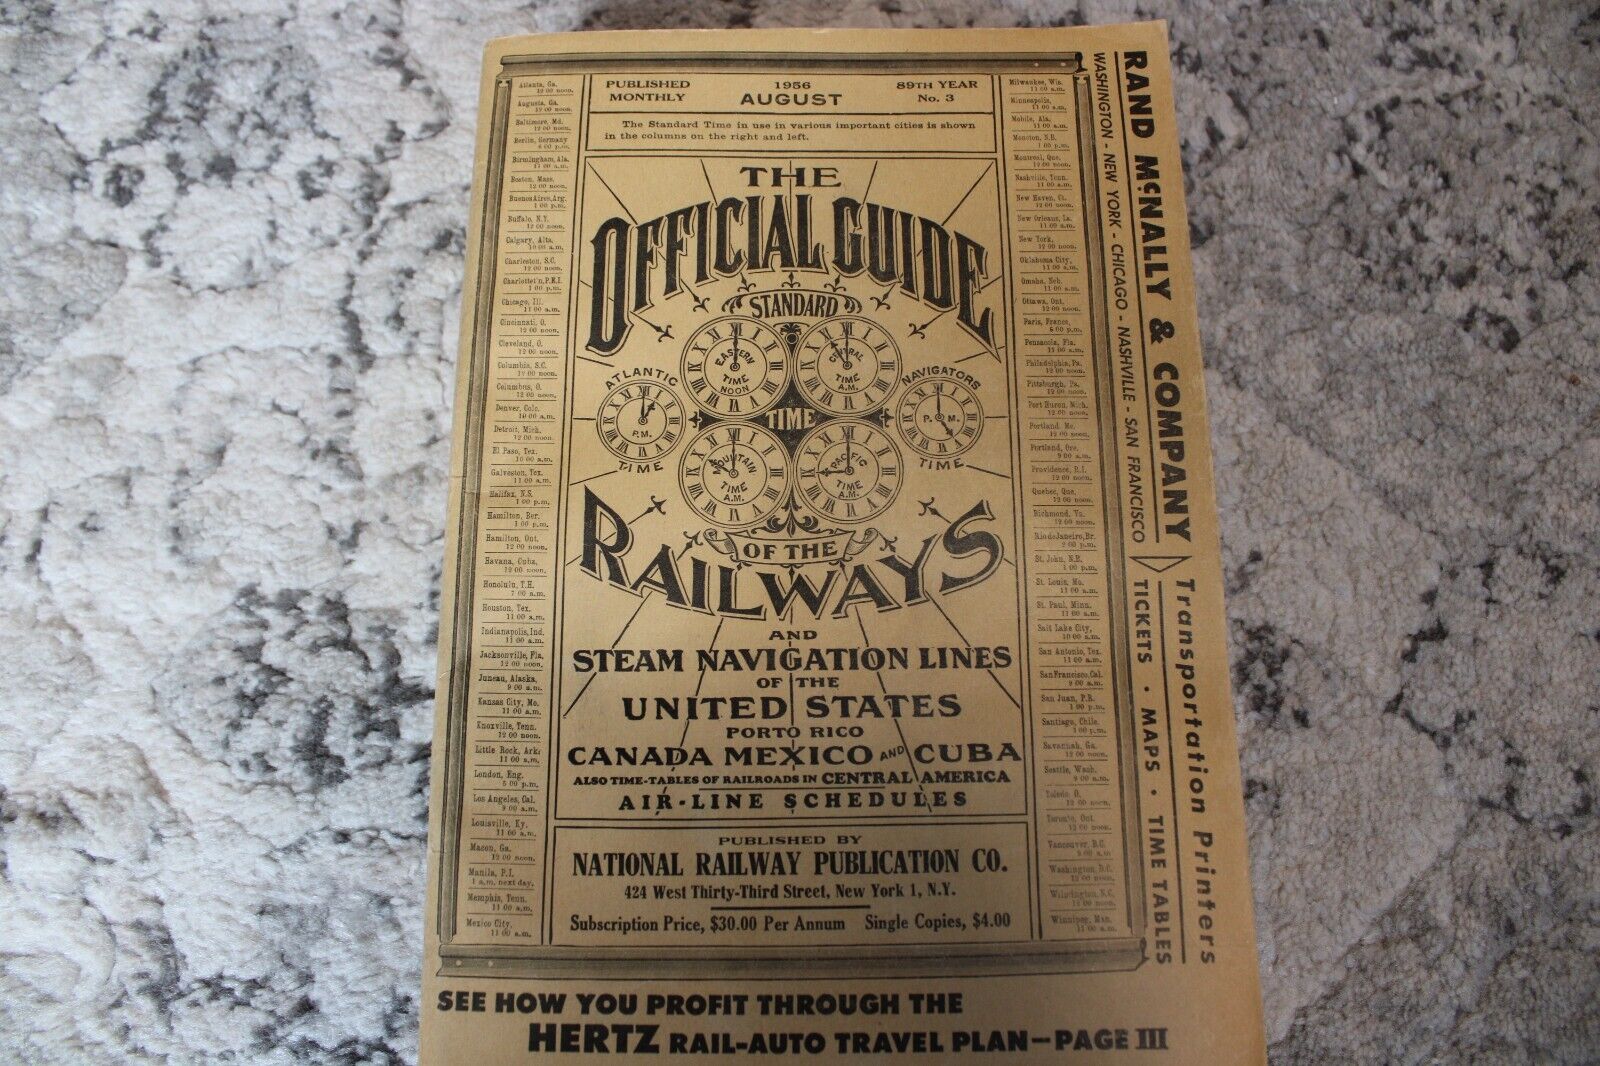 1956 OFFICIAL GUIDE STANDARD TIME RAILWAYS STEAM NAVIGATION TIMES AIRLINE SCHED